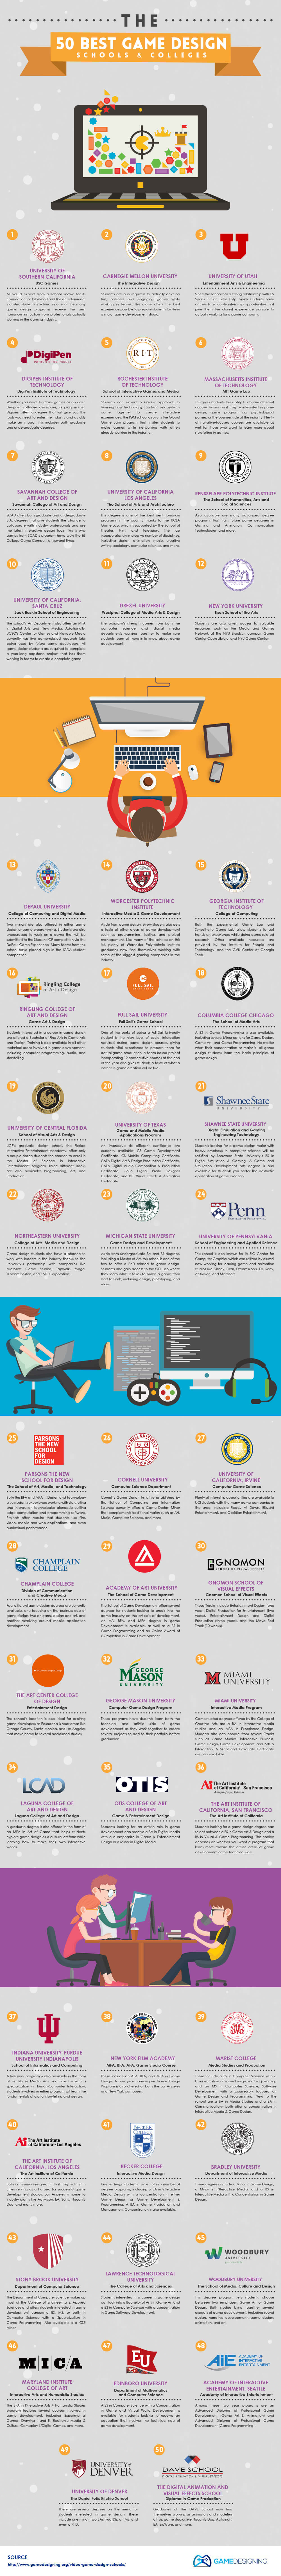 The Top 50 Colleges for Aspiring Game Designers